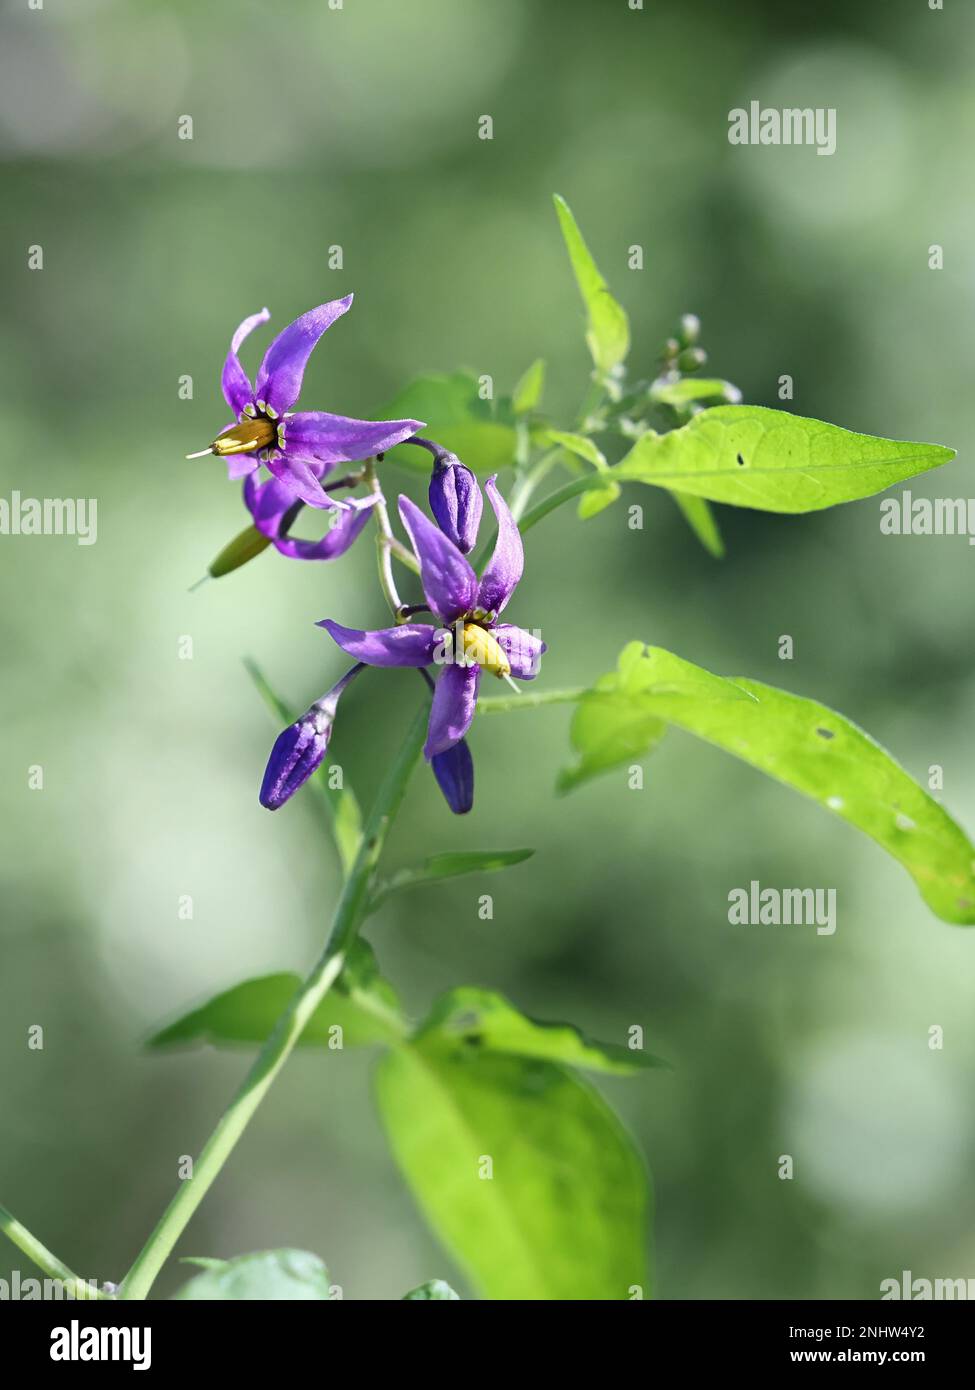 Bittersweet, Solanum dulcamara, known also as Blue bindweed or Bitter nightshade, wild poisonous plant from Finland Stock Photo